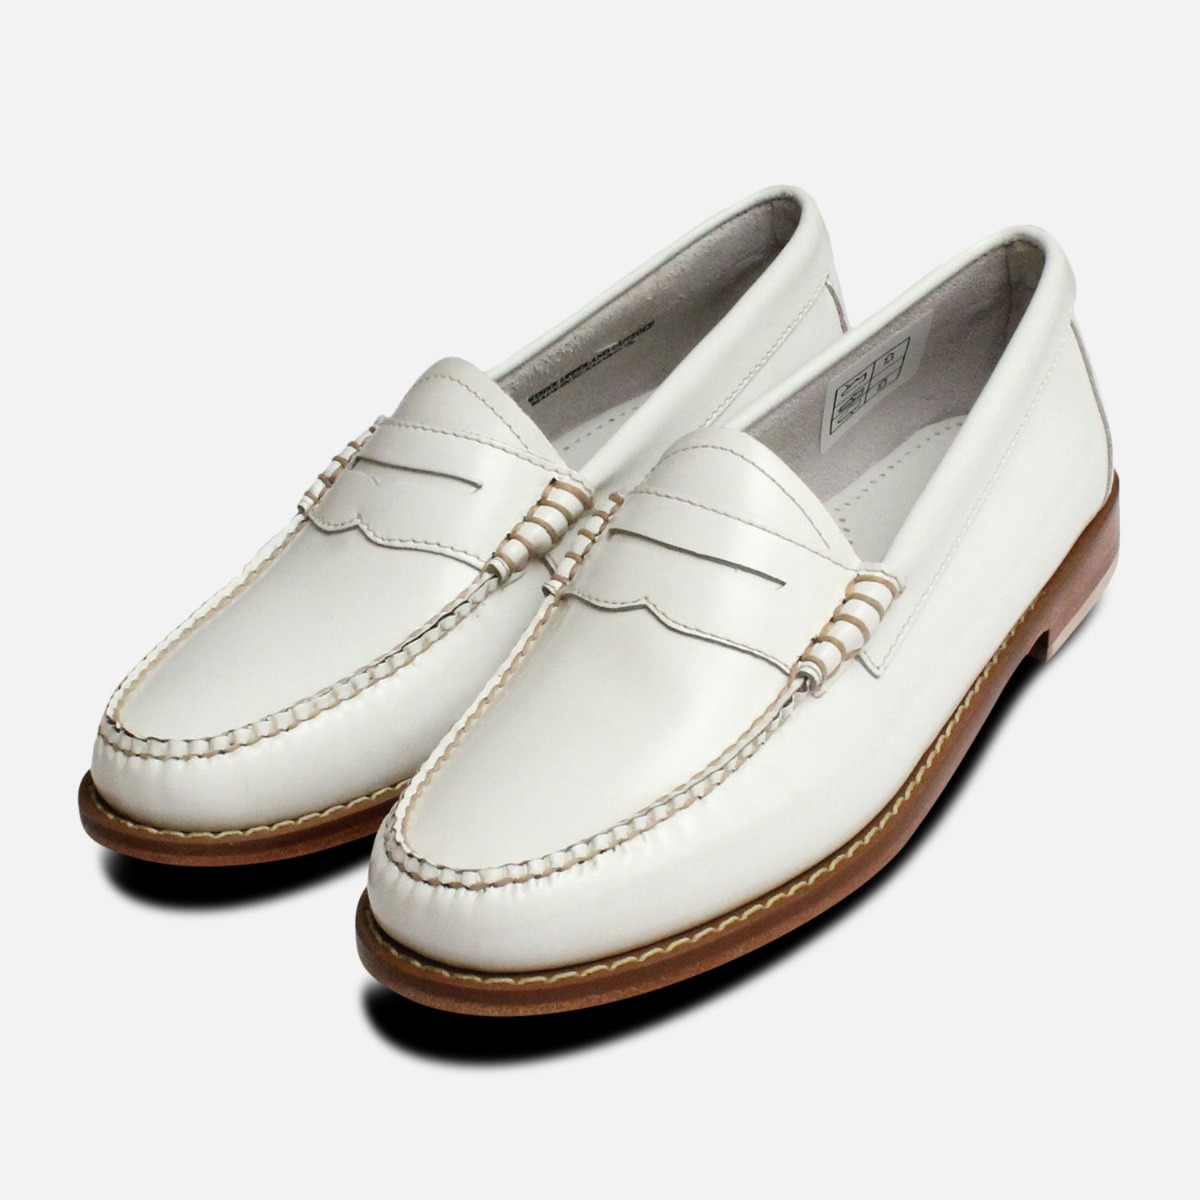 White Leather Ladies Bass Penny Loafers | eBay